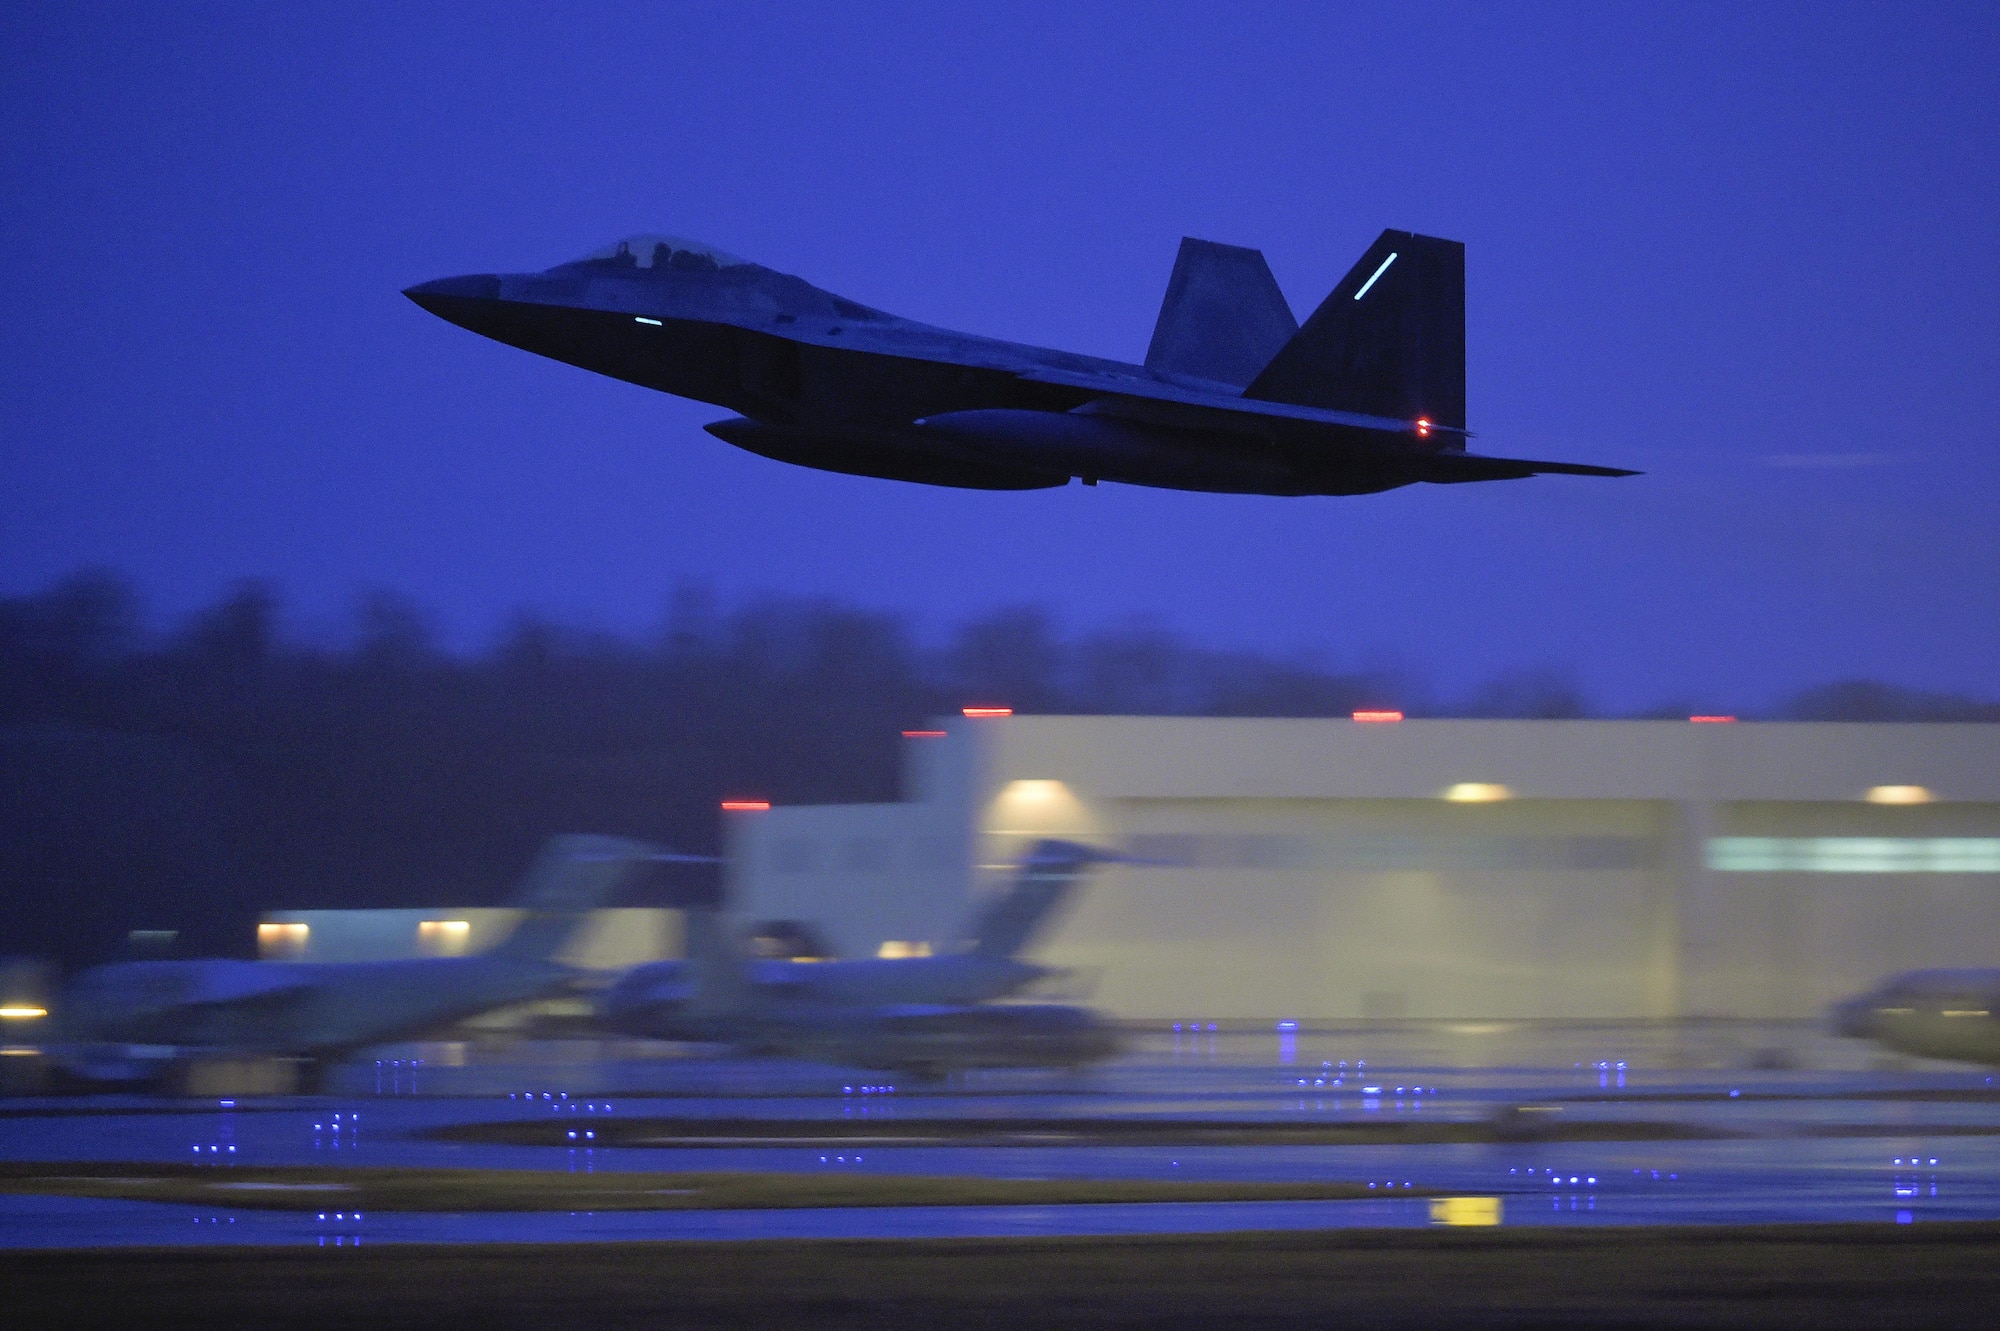 A U.S. Air Force F-22 Raptor assigned to the 90th Fighter Squadron takes off from Joint Base Elmendorf-Richardson, Alaska, March 28, 2016. At the direction of U.S. Navy Adm. Harry Harris Jr., U.S. Pacific Command commander, Pacific Air Forces will send 12 F-22 Raptor aircraft and approximately 190 Airmen to Royal Australian Air Force Base Tindal in early February to conduct combined exercises and training missions with the Royal Australian Air Forces as part of the Enhanced Air Cooperation Initiative under the Force Posture Agreement between the United States and Australia.  (U.S. Air Force photo by Alejandro Pena/Released)